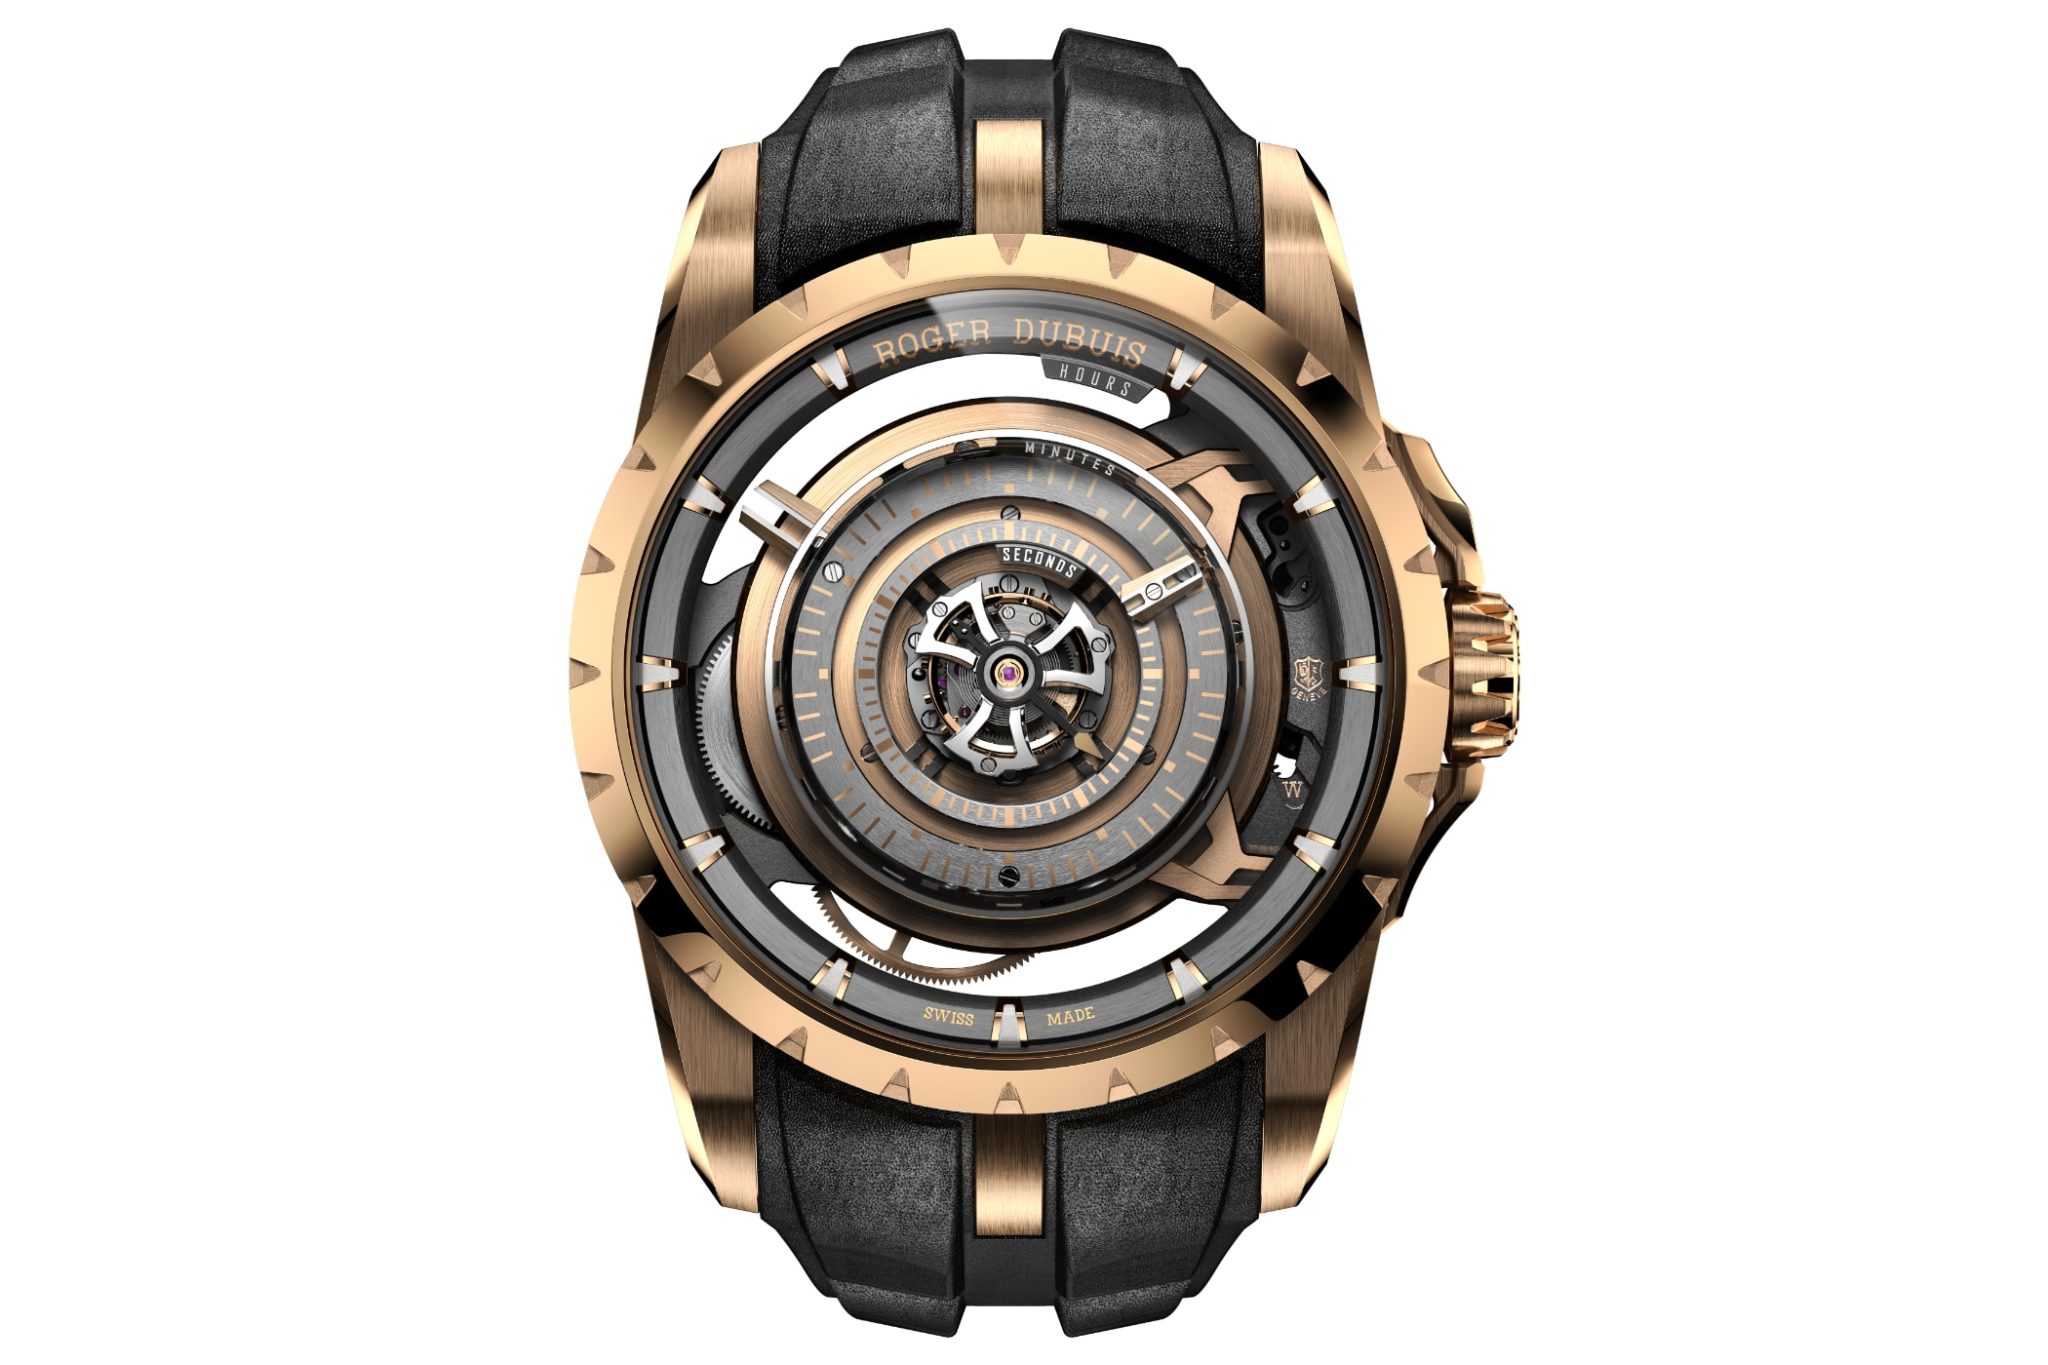 roger-dubuis-orbis-in-machina-rddbex1119-soldier.